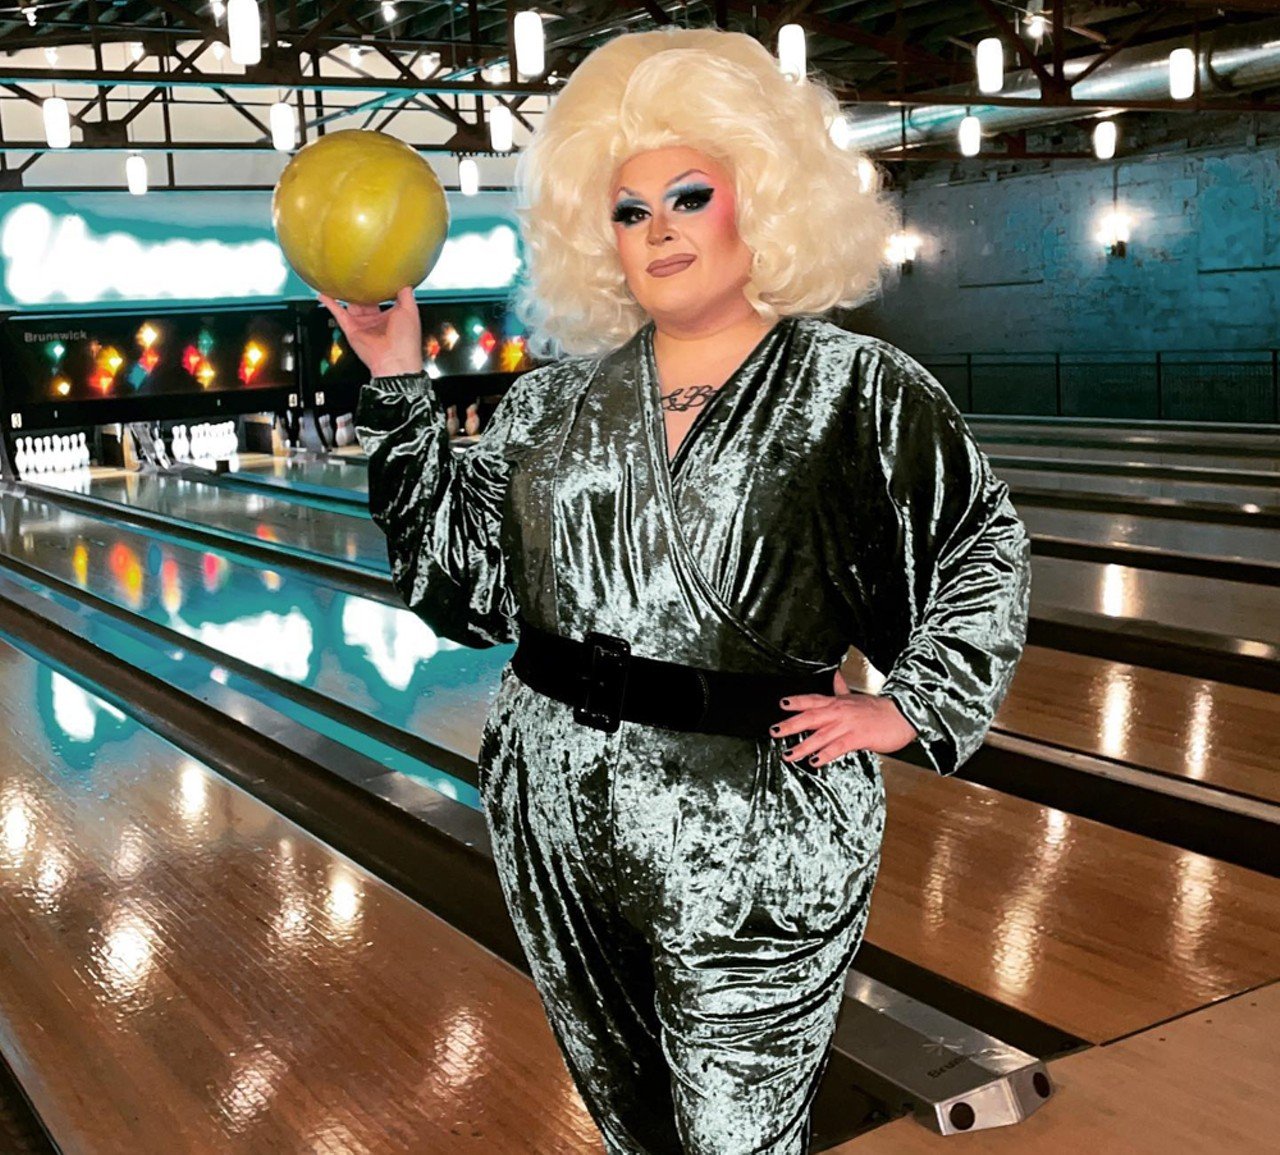  Zsa Zsa Gabortion
@zsazsagabortion  
Zsa Zsa Gabortion designs and sews outfits for other queens, including Jade Jolie. Unrelatedly, Gabortion once dressed up as &#147;sexy Colonel Sanders.&#148; Very fitting for a Kentuckian drag artist!
Photo via zsazsagabortion/Instagram